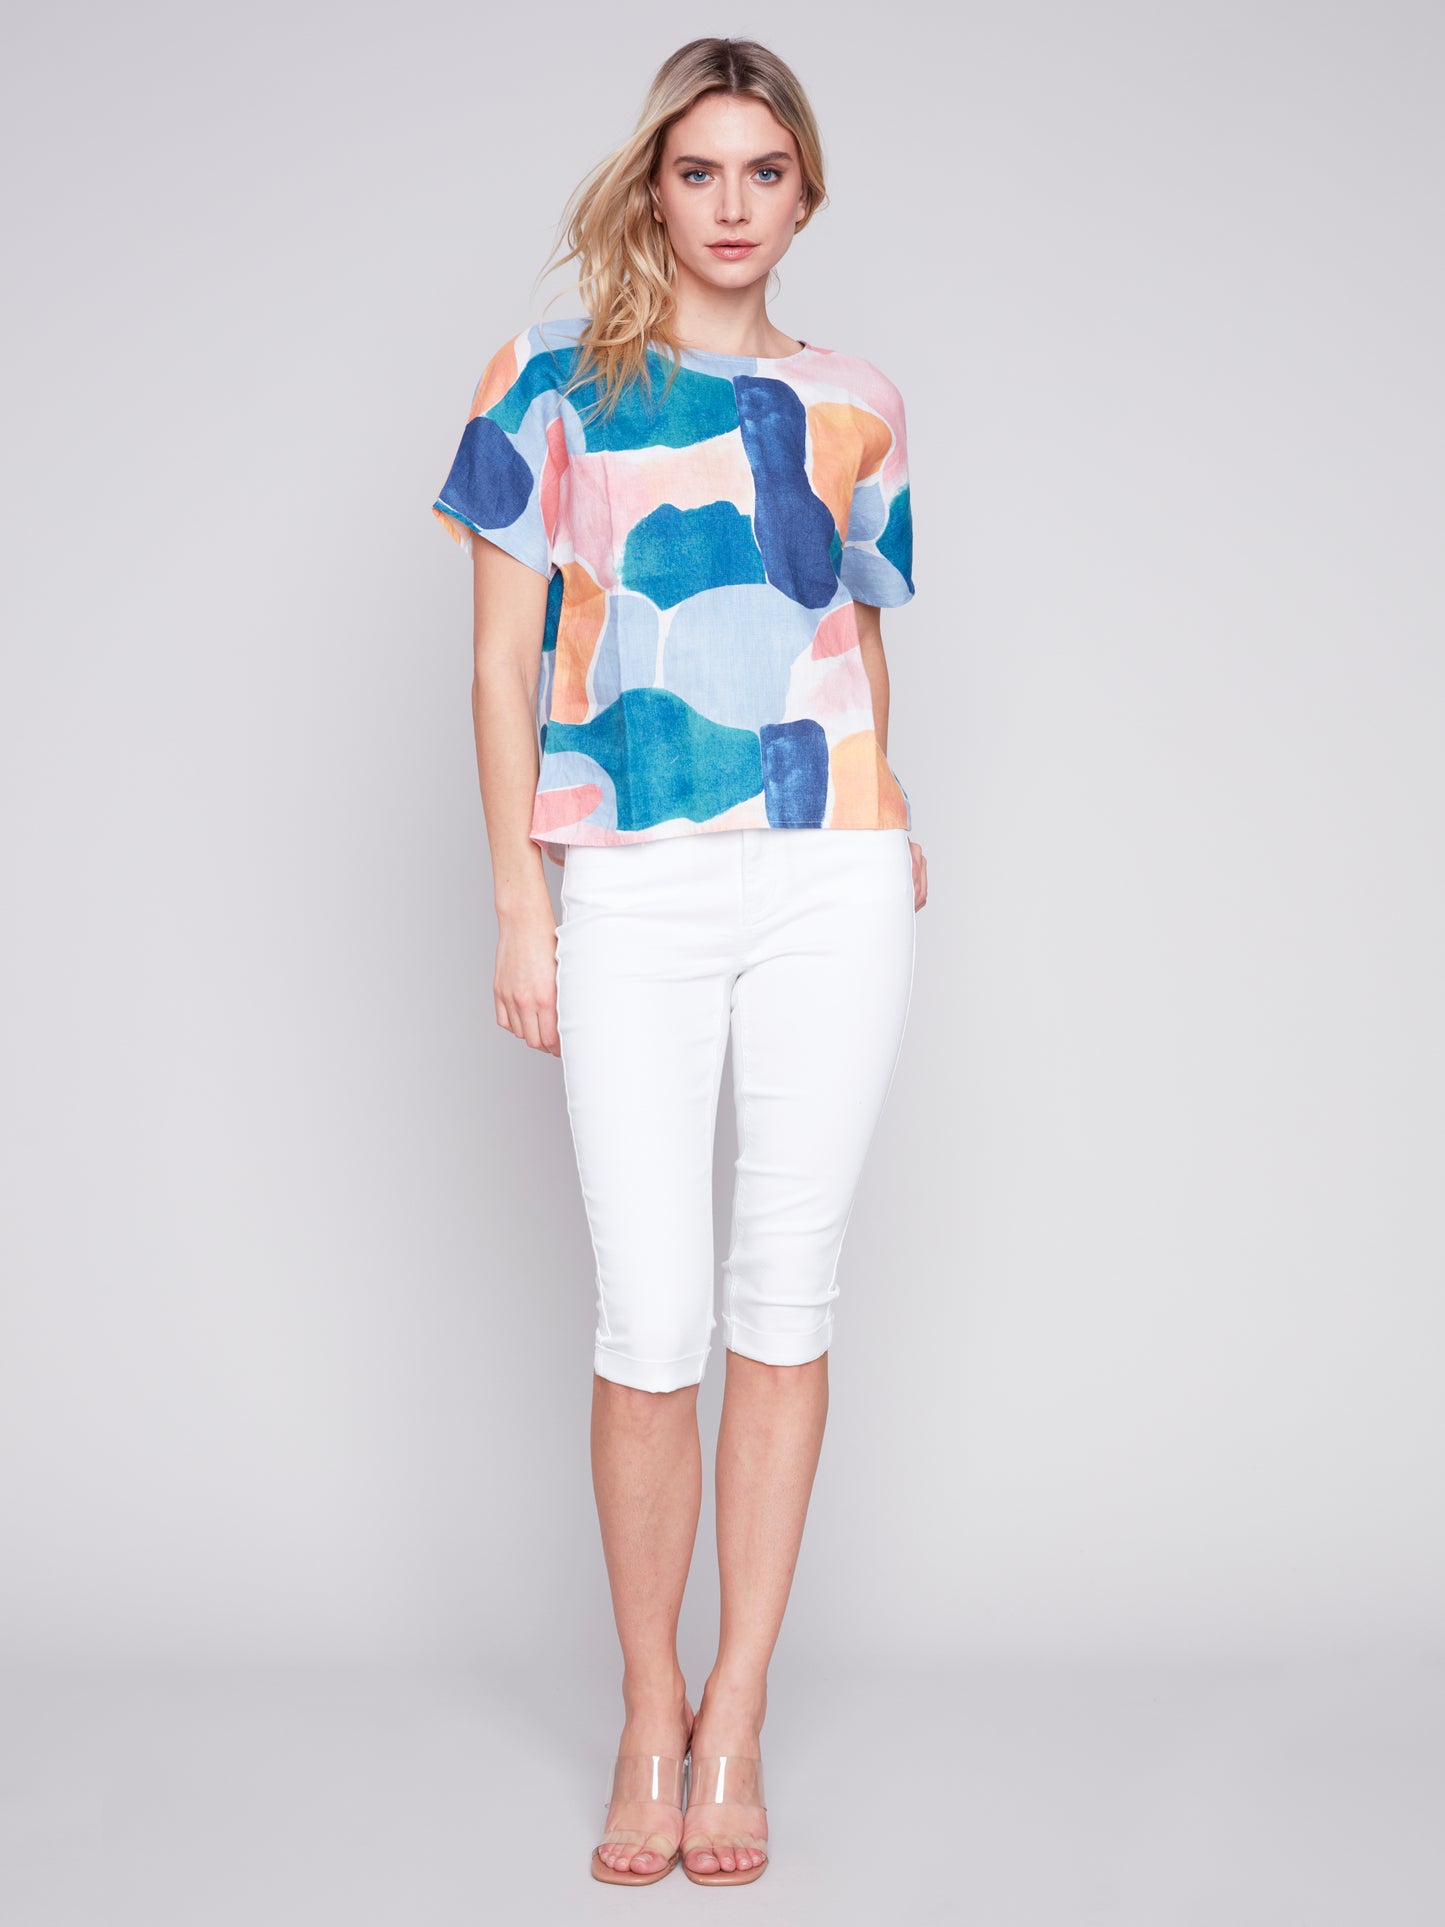 A blonde woman in a colorful "Charlie B Dolman Linen Printed Top" and white pants, standing against a light gray background.